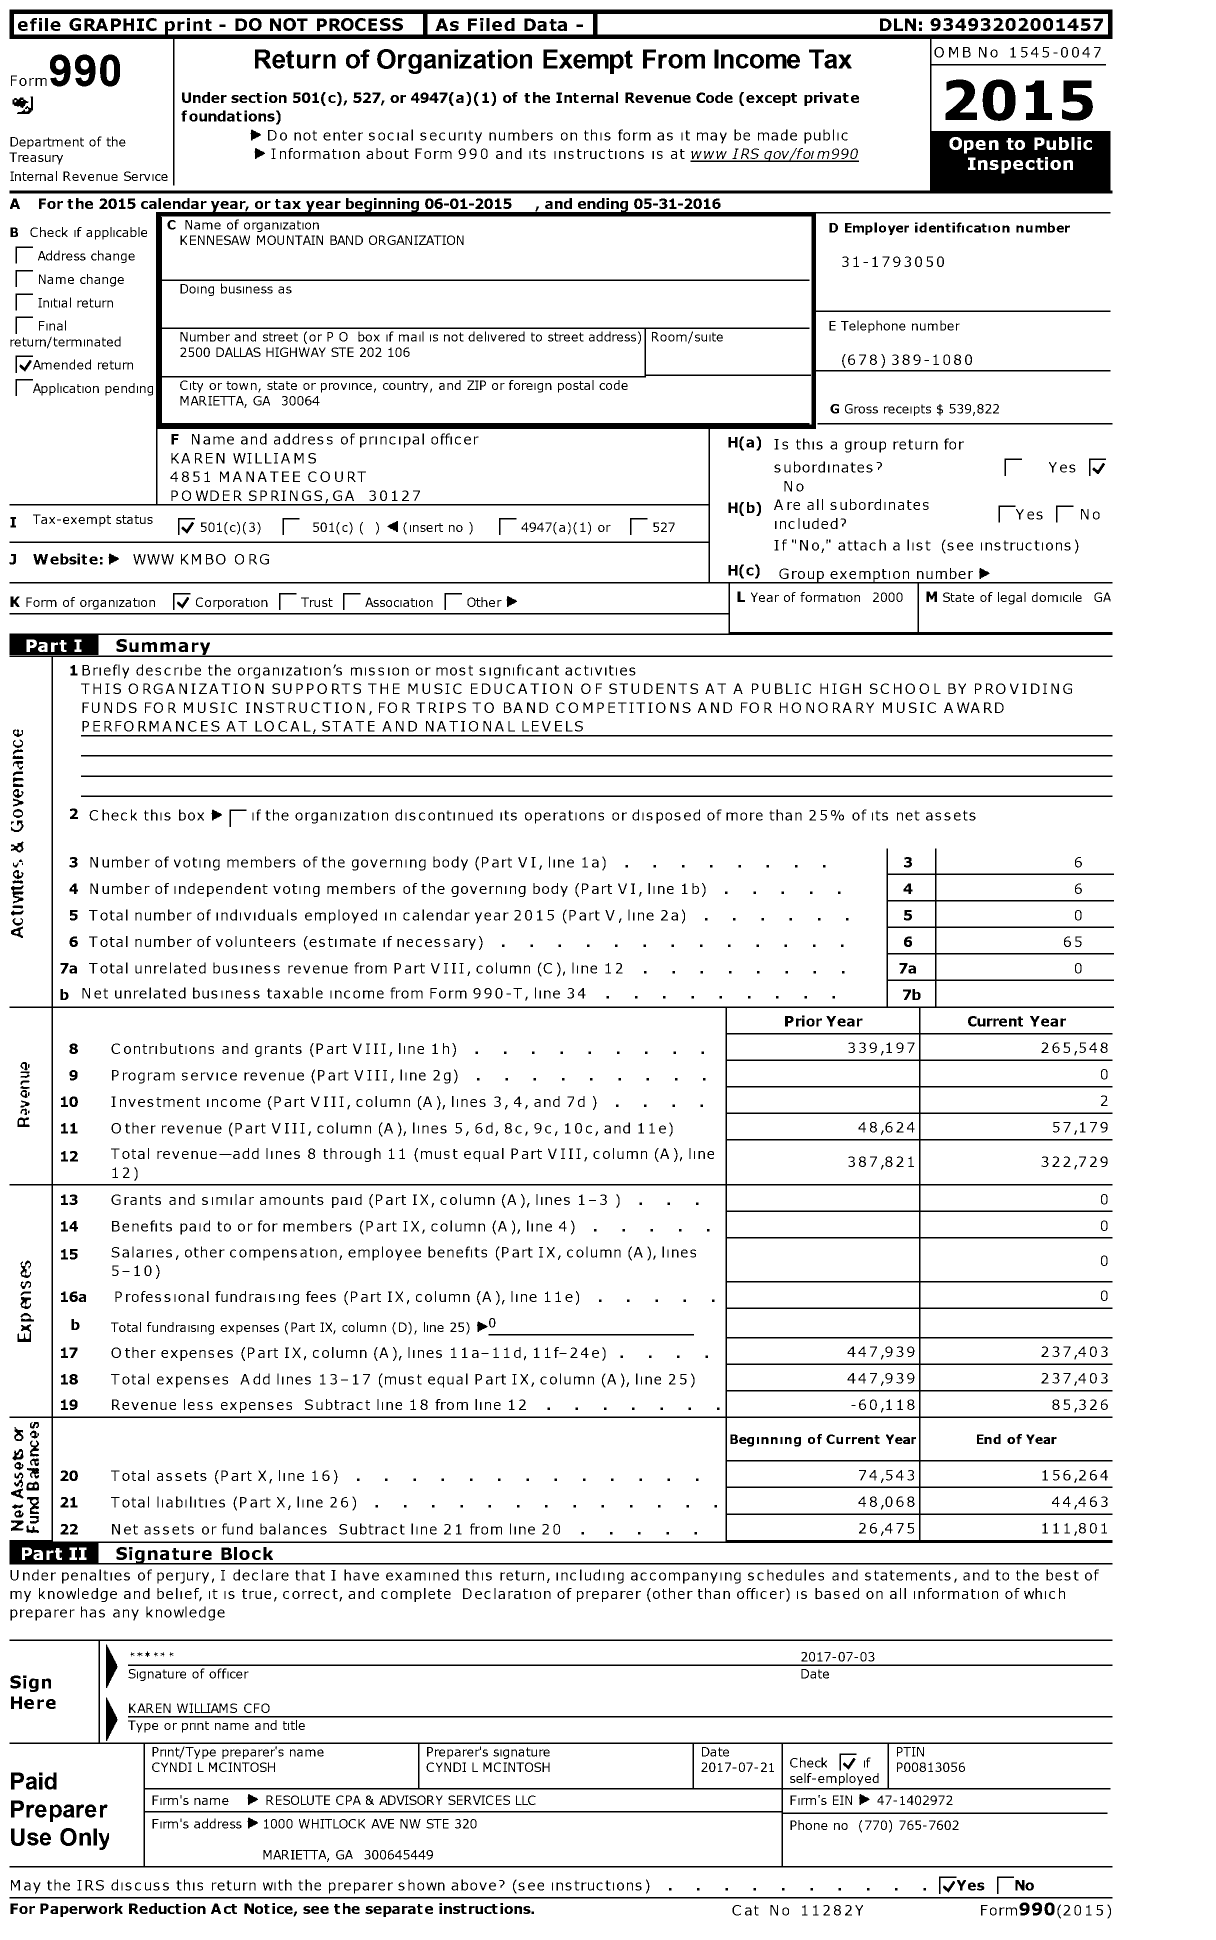 Image of first page of 2015 Form 990 for Kennesaw Mountain Band Organization (KMBO)